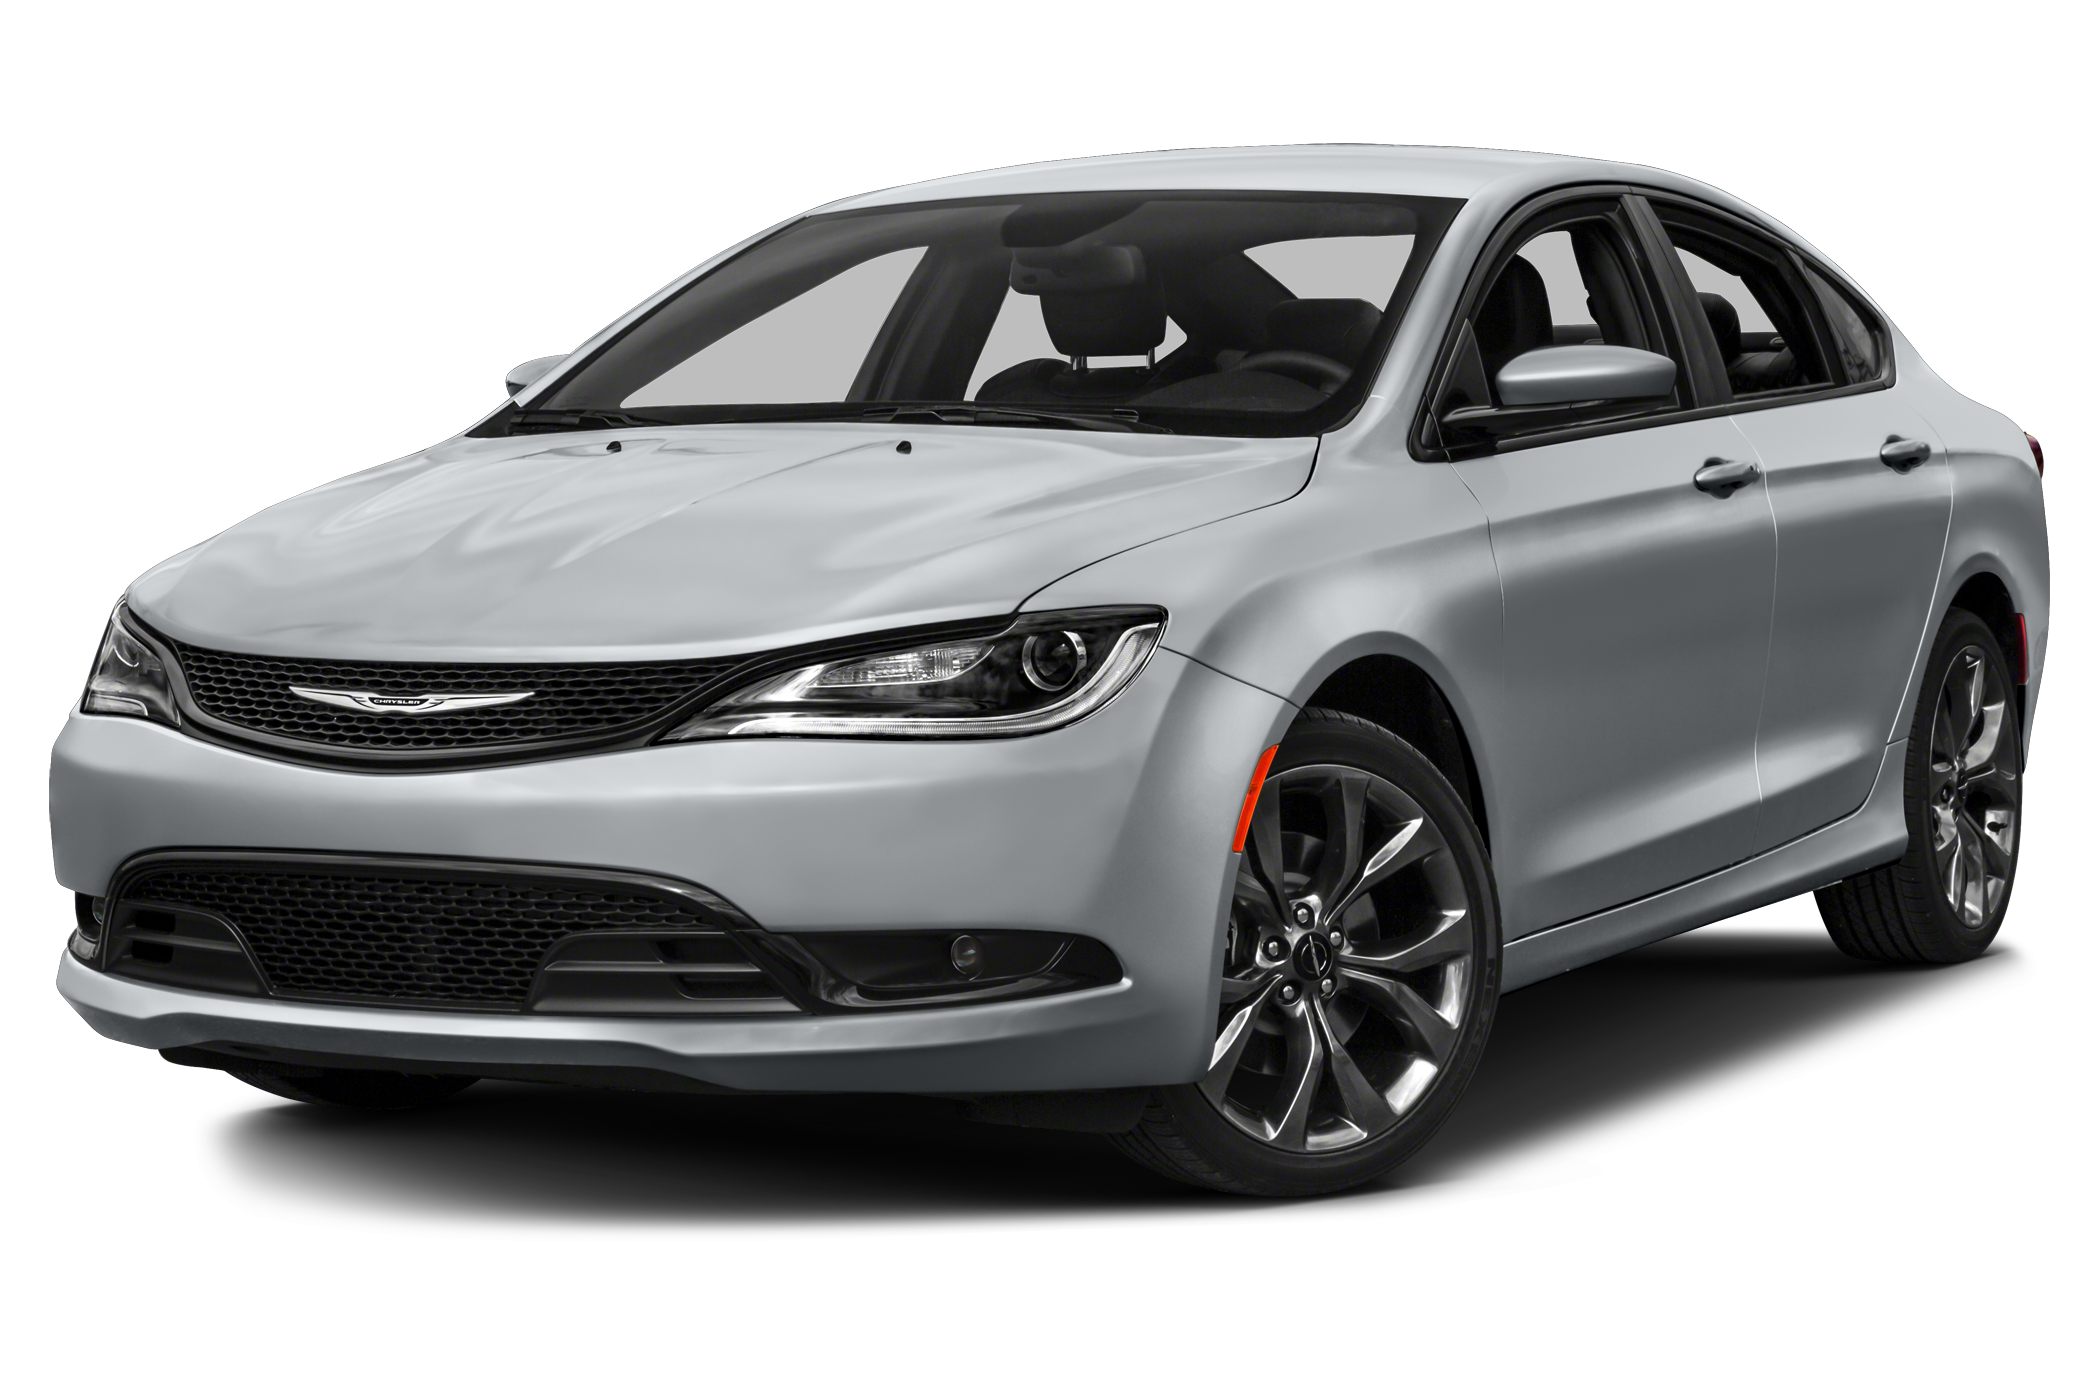 2016 chrysler 200 s 4dr front wheel drive sedan specs and prices 2016 chrysler 200 s 4dr front wheel drive sedan specs and prices